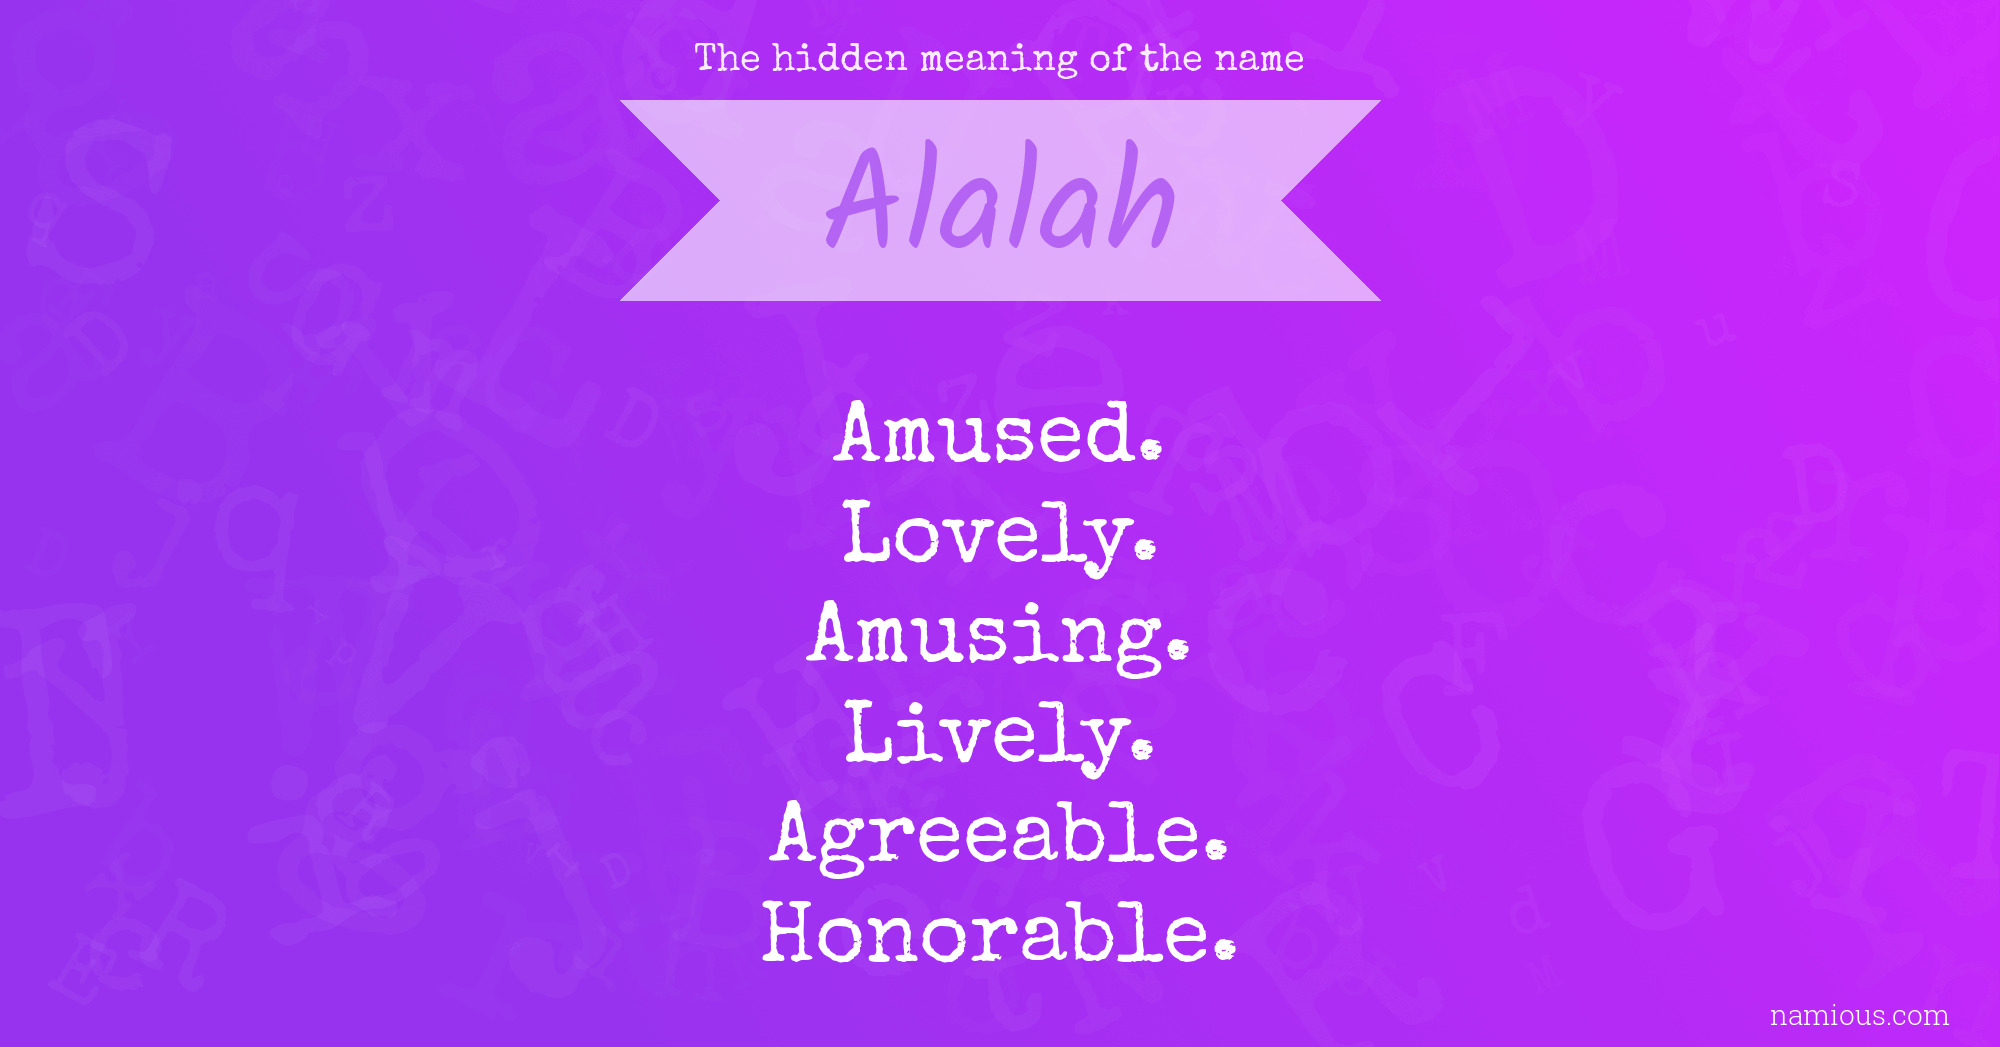 The hidden meaning of the name Alalah